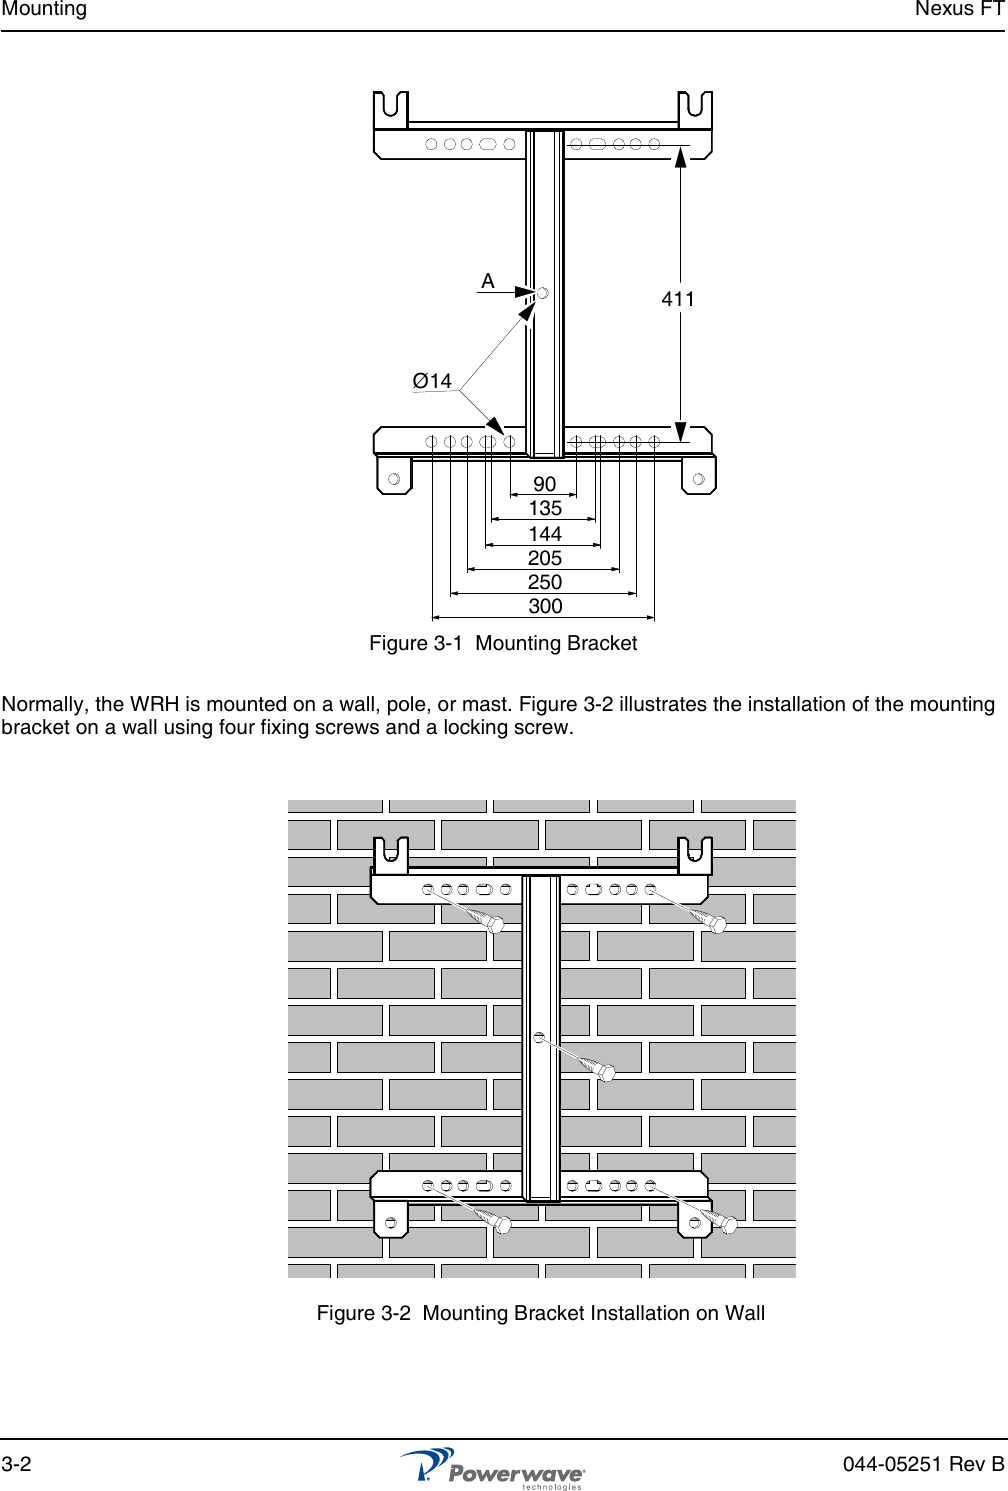 Mounting Nexus FT3-2 044-05251 Rev BFigure 3-1  Mounting BracketNormally, the WRH is mounted on a wall, pole, or mast. Figure 3-2 illustrates the installation of the mounting bracket on a wall using four fixing screws and a locking screw.Figure 3-2  Mounting Bracket Installation on Wall90135144205250300Ø14A411